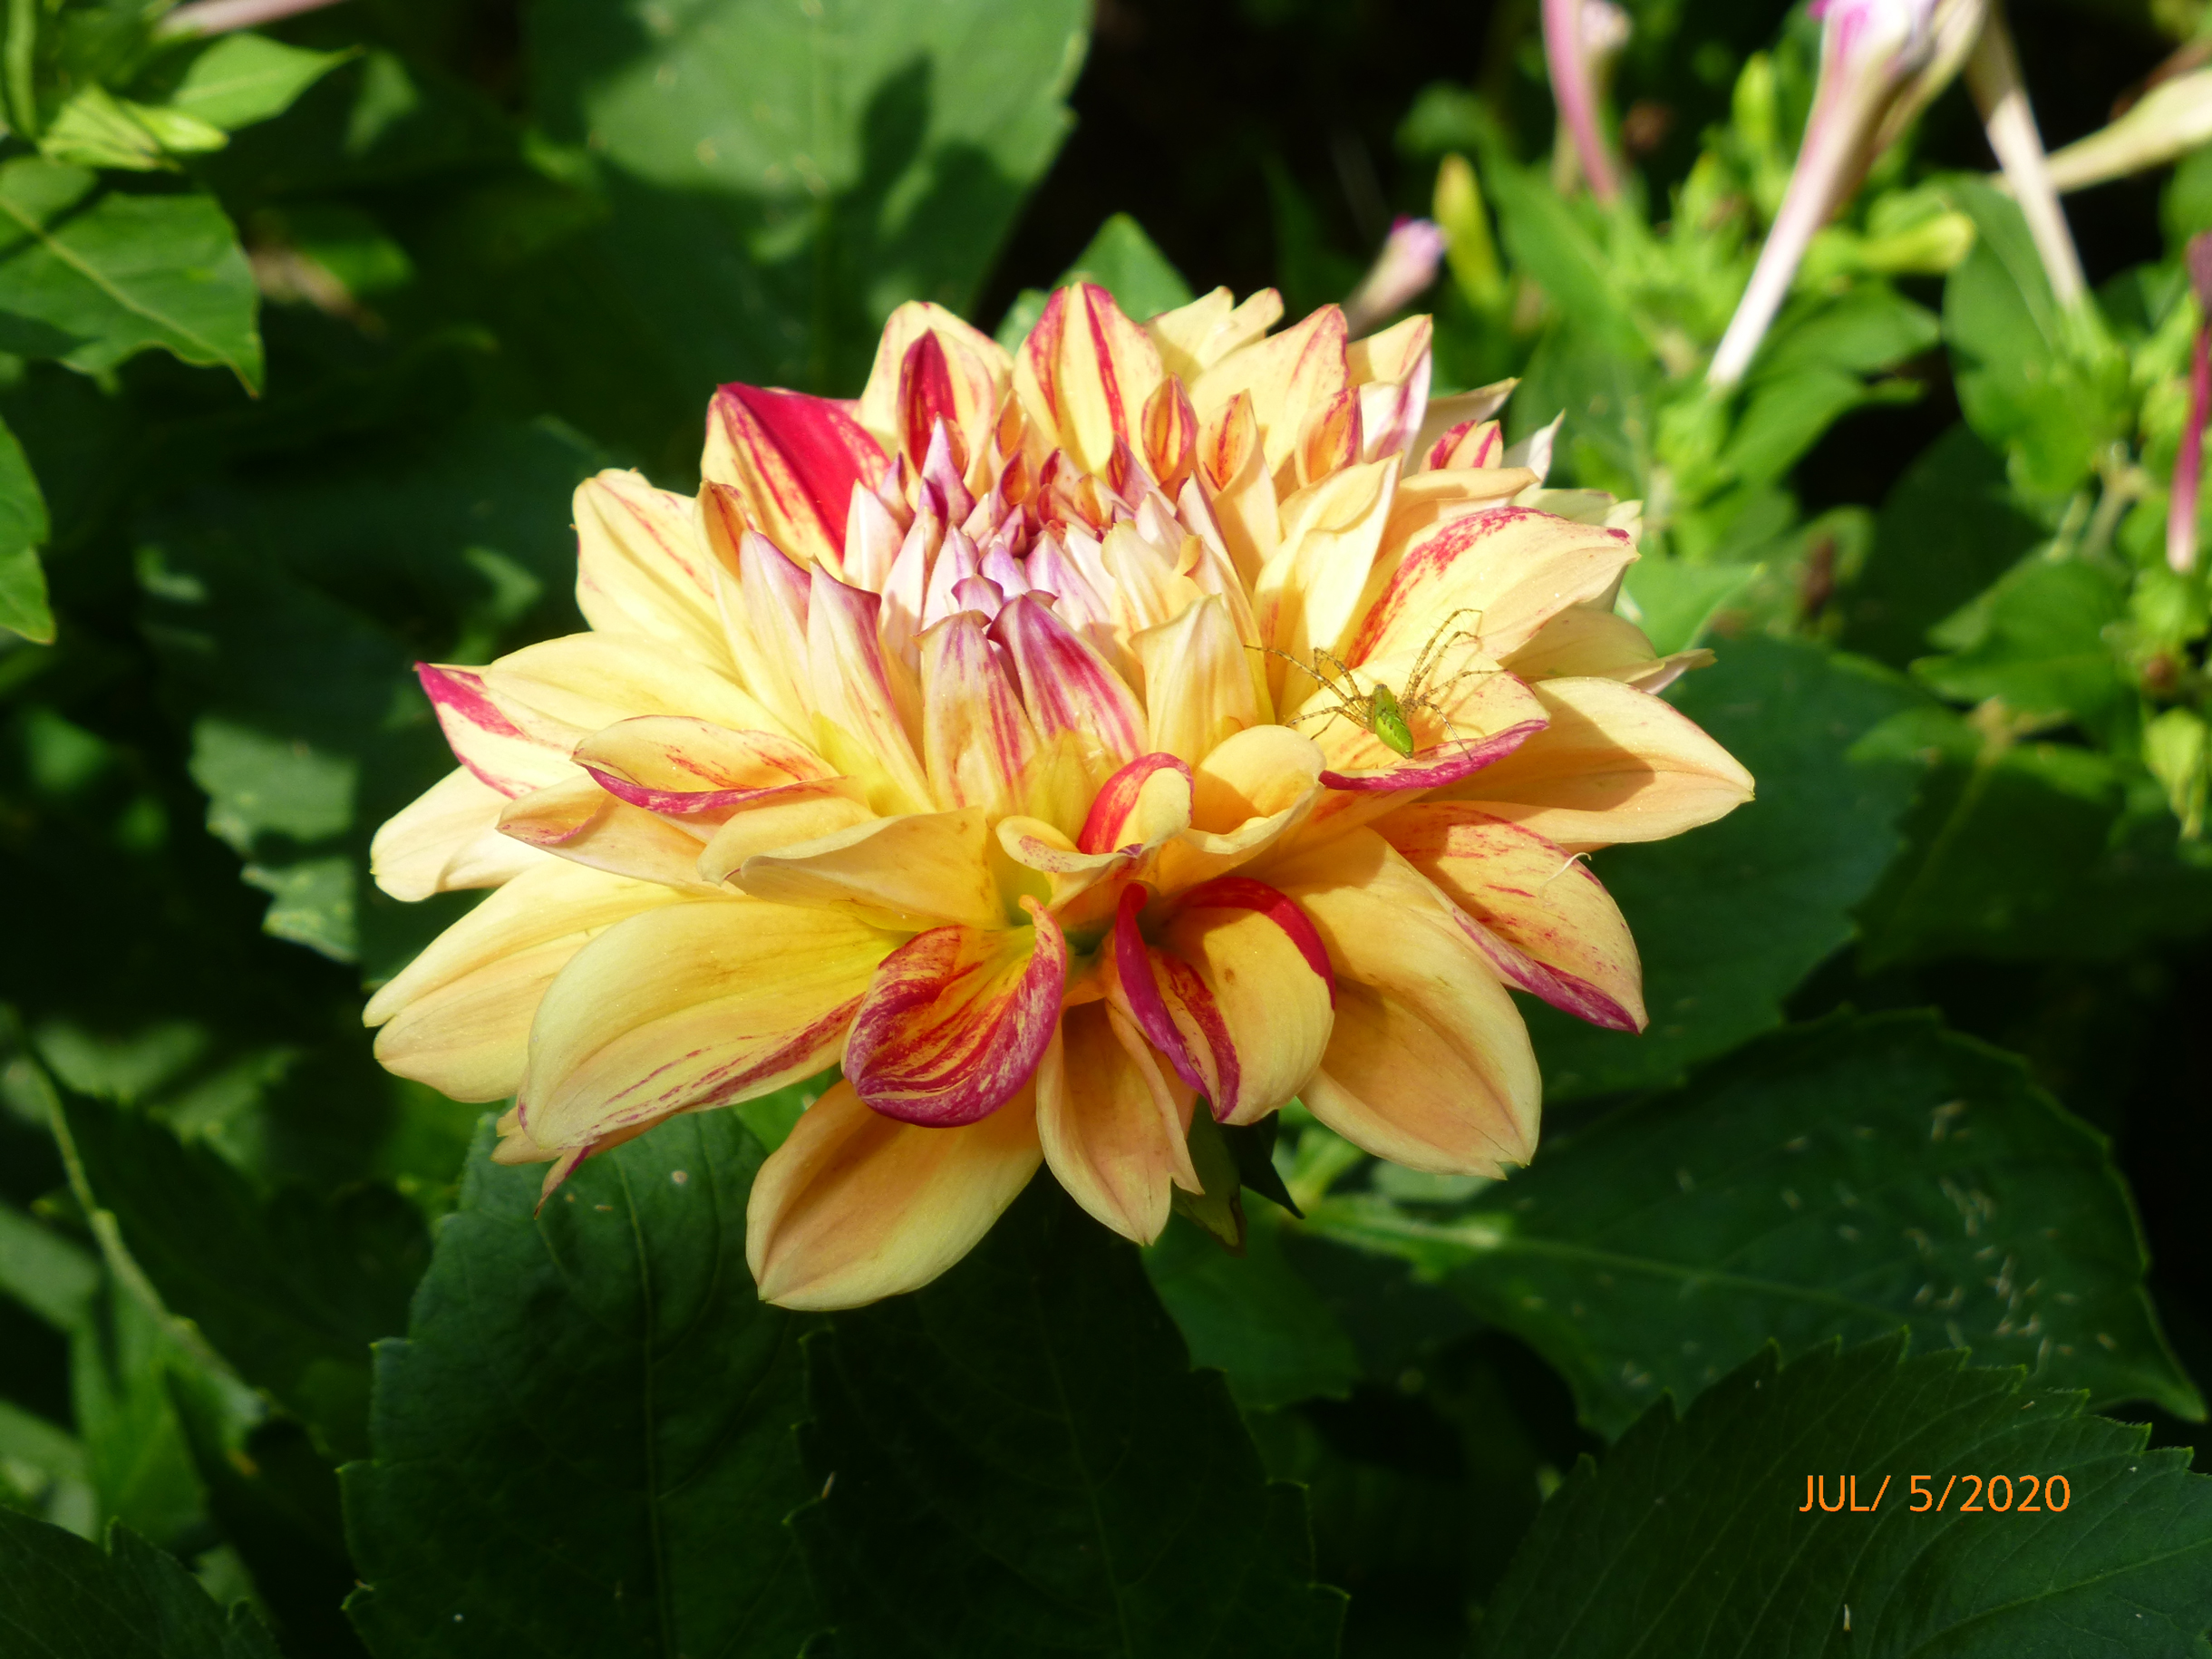 "Graced by a Dahlia" photo of a scarlet-tipped yellow dahlia by Suzanne Cottrell